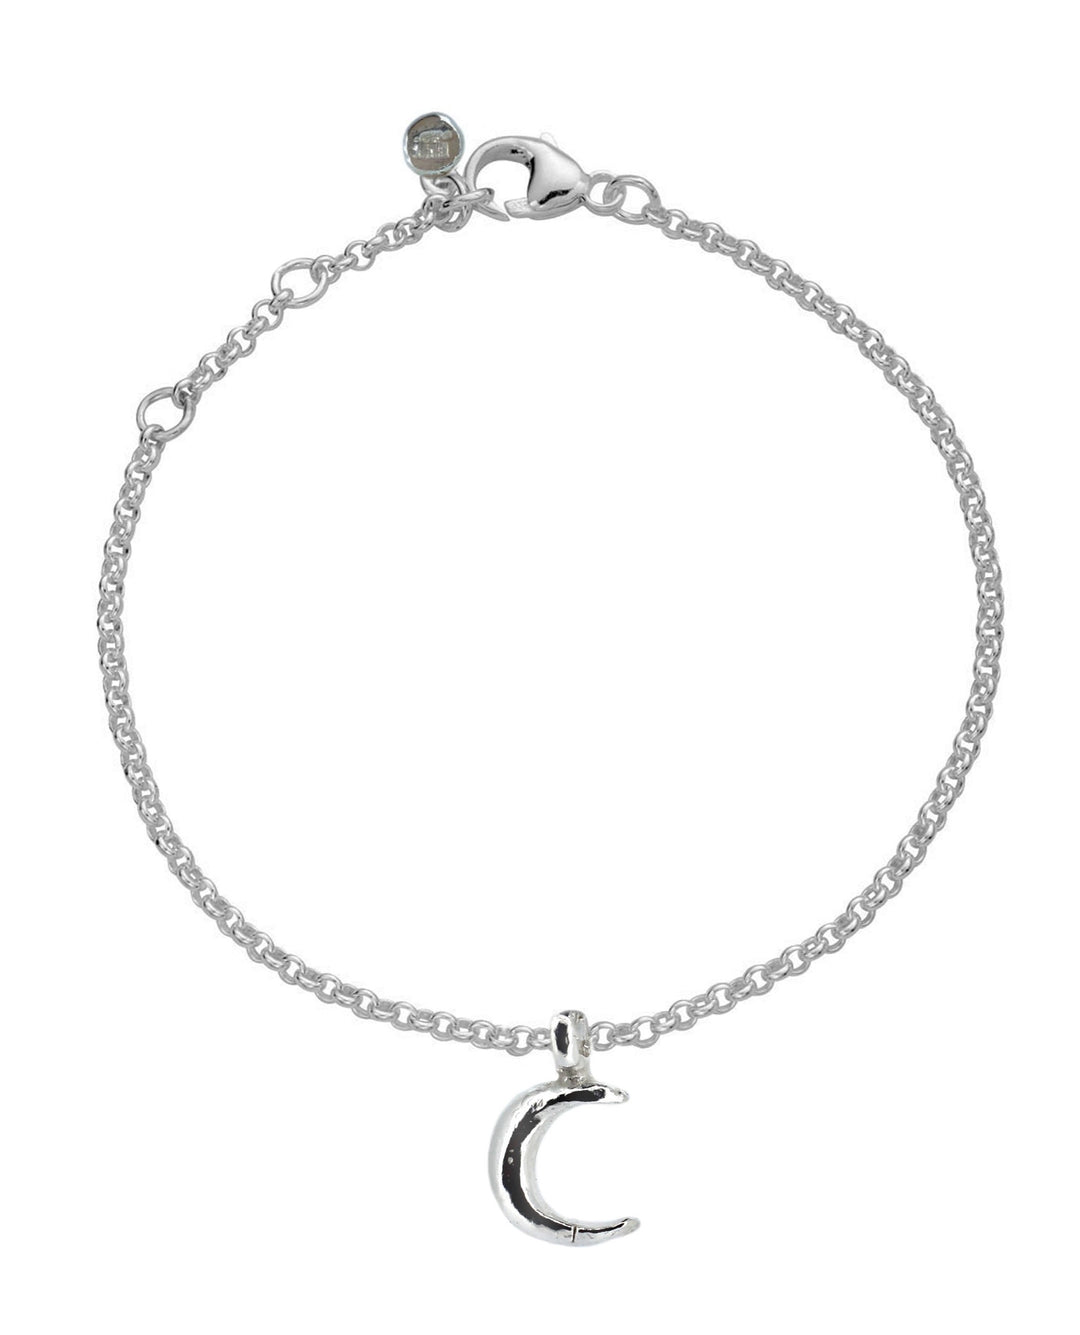 Crescent Moon Chain Anklet